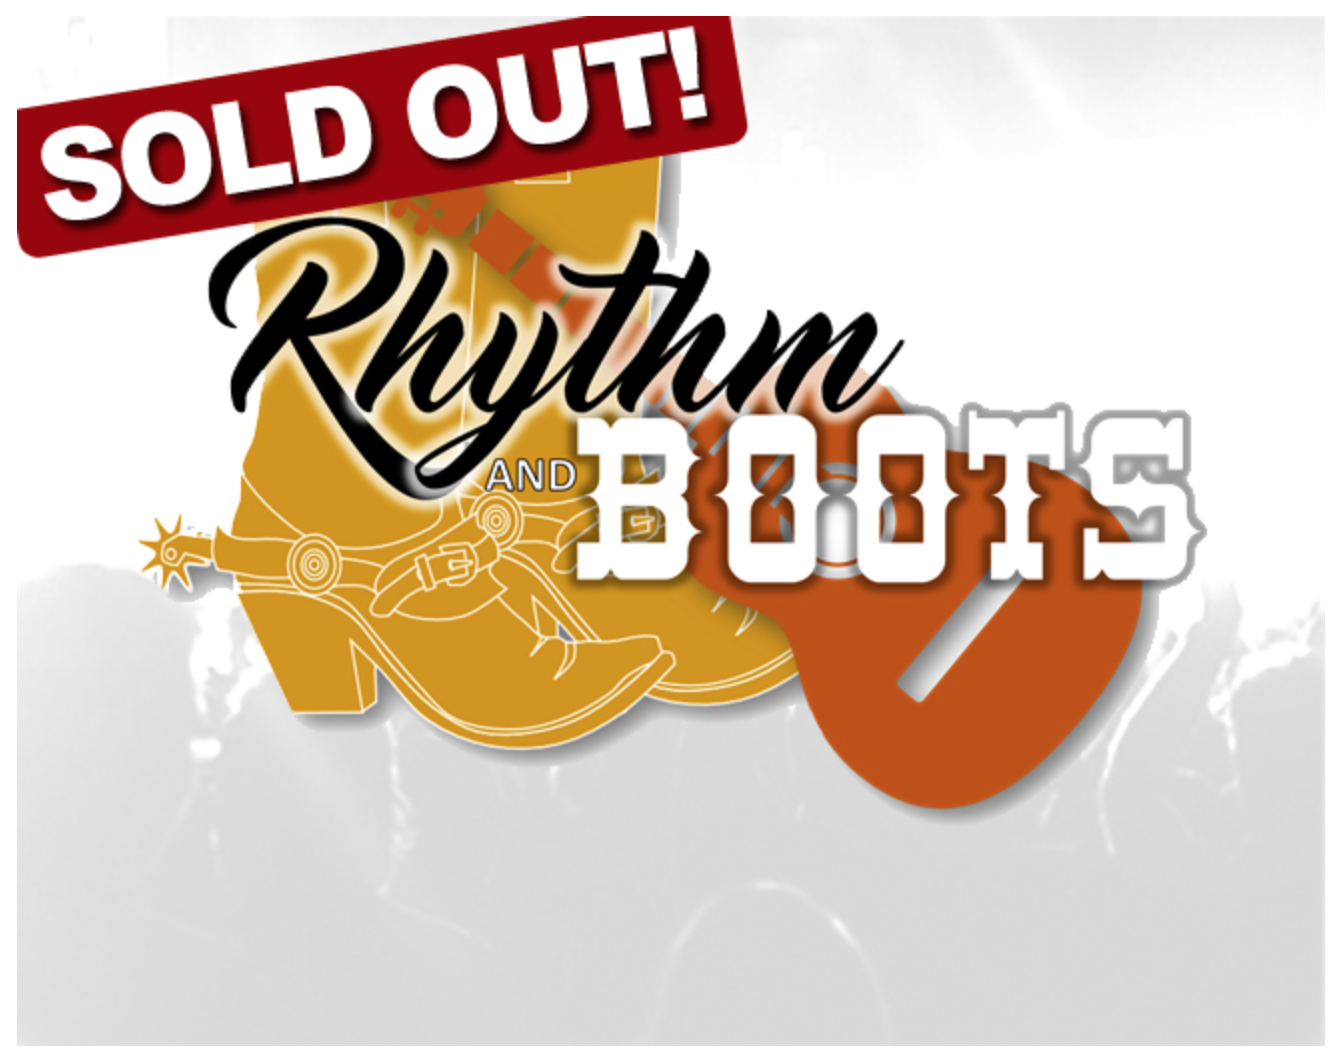 Rhythm & Boots Sam Hunt Show is SOLD OUT!